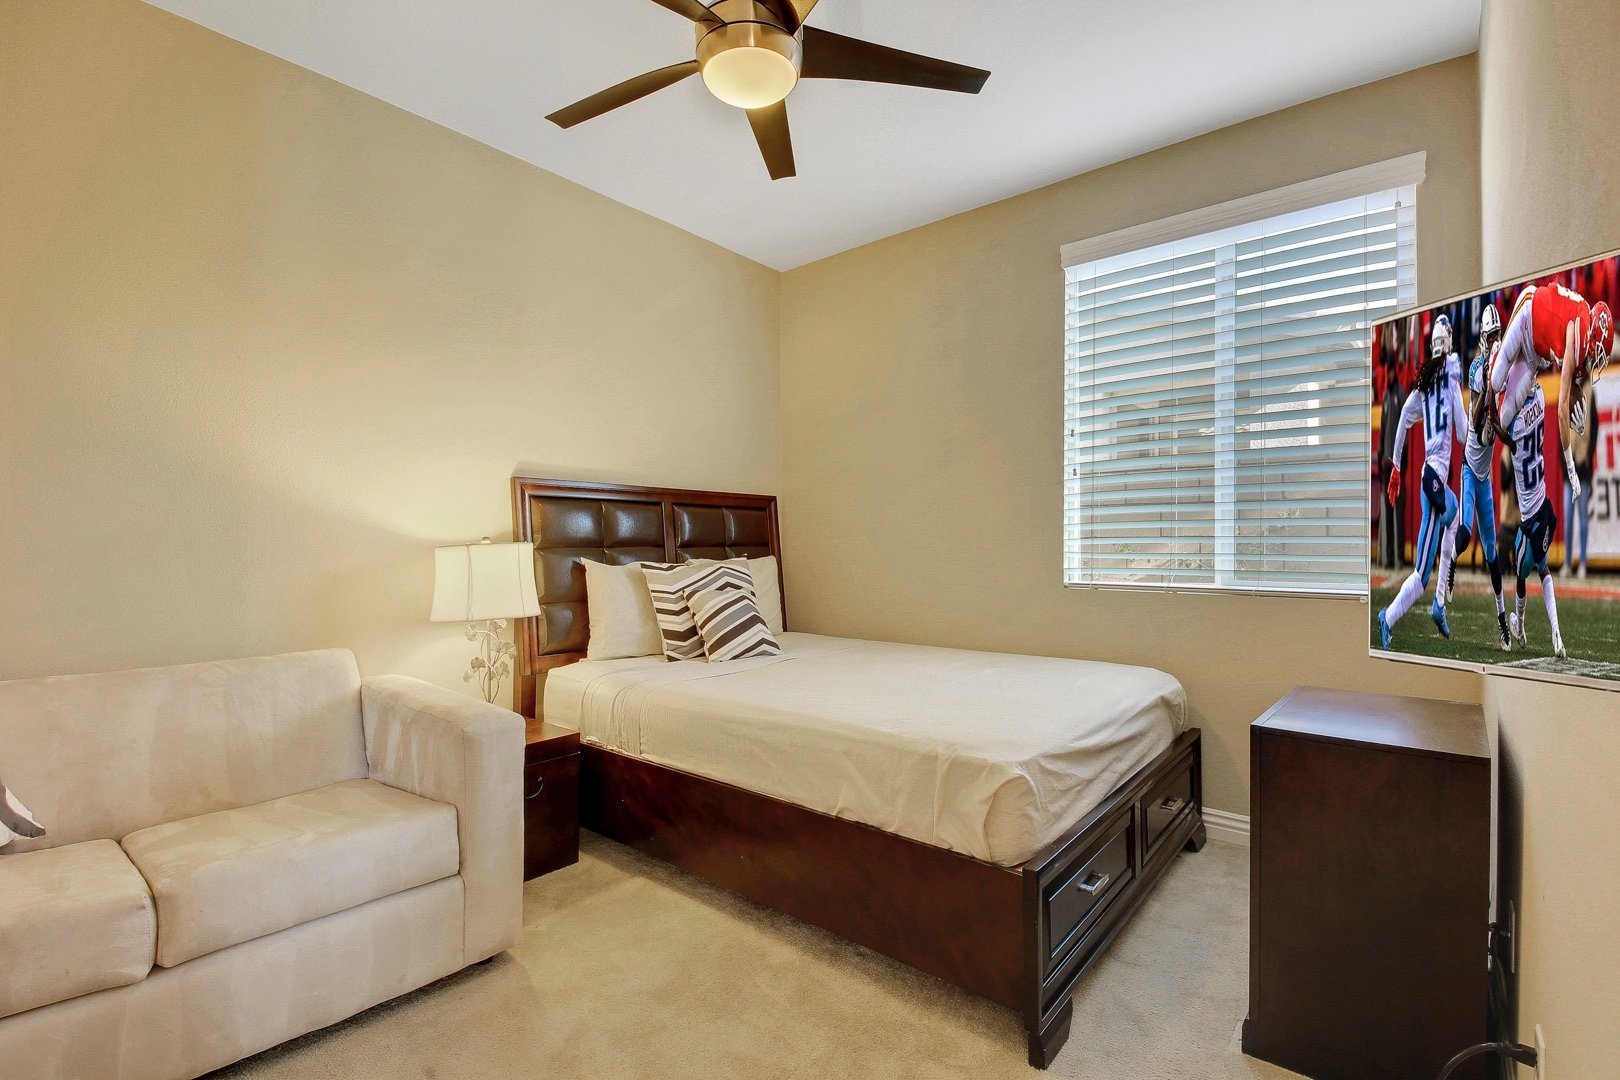 Bedroom 2 has a queen size bed and full sofa sleeper to sleep 4 in this room . 40-inch Visio TV